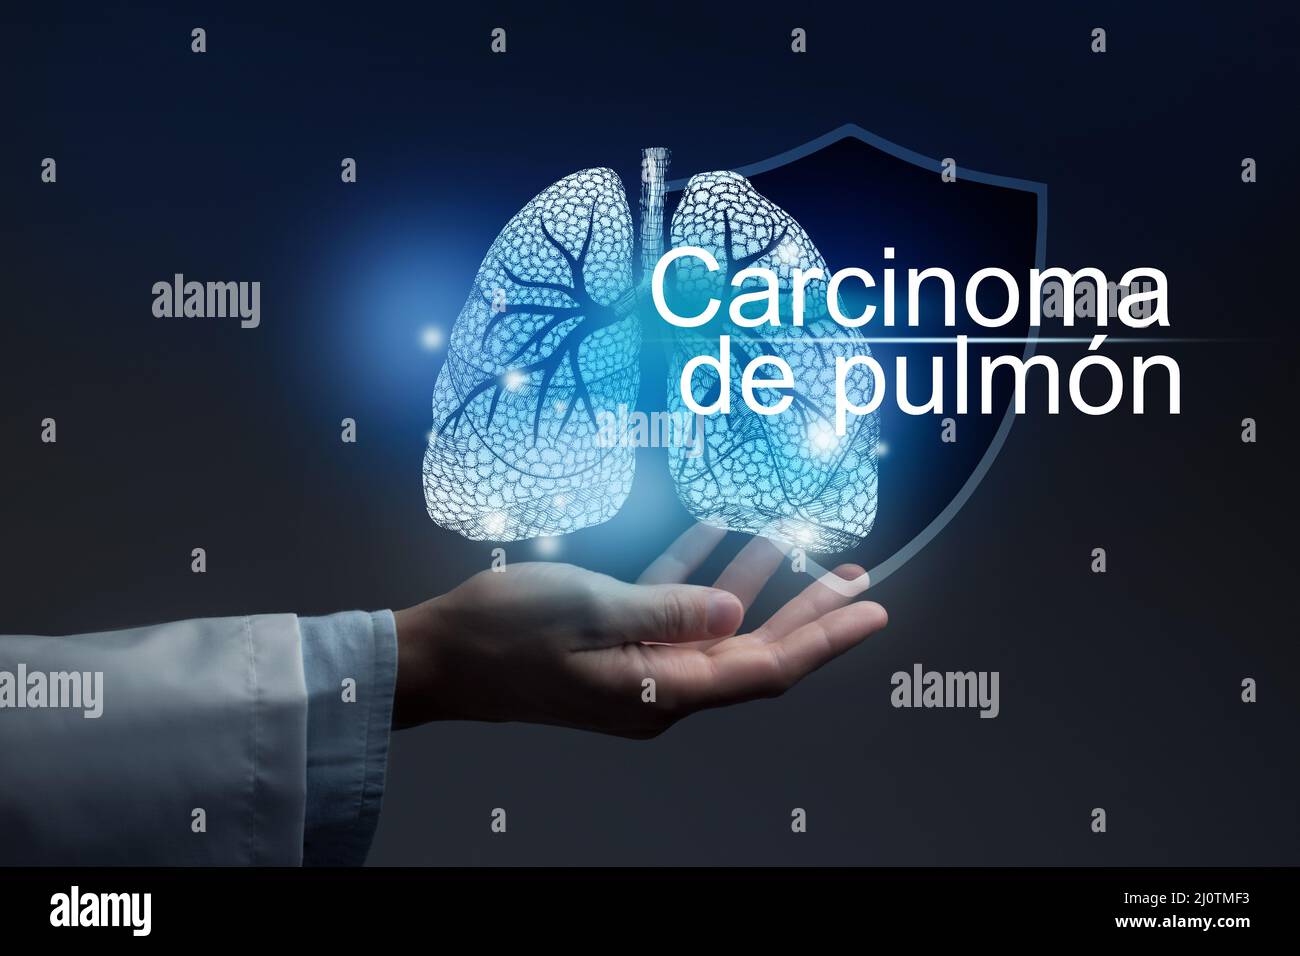 Medical banner Carcinoma with spanish translation Carcinoma de pulmón on blue background with large copy space for text or checklist. Stock Photo